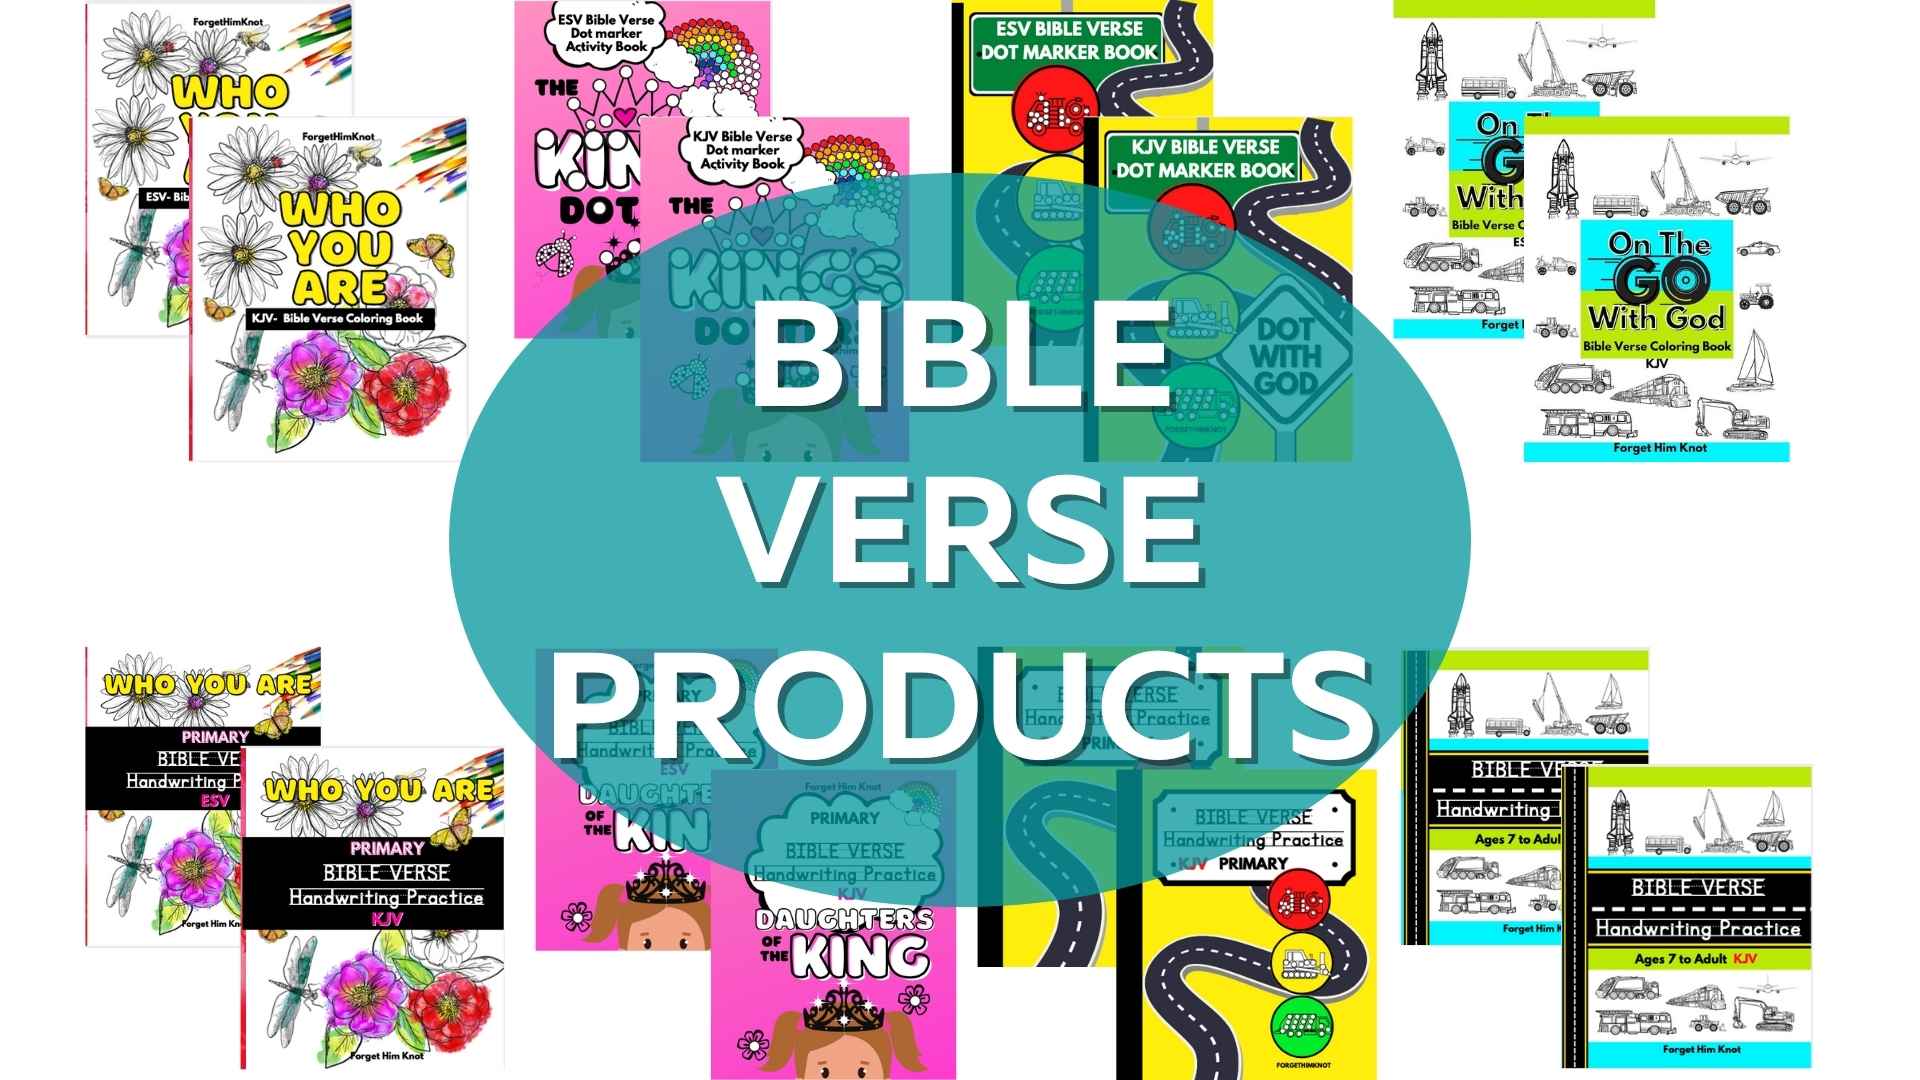 Bible verse coloring books and handwriting books